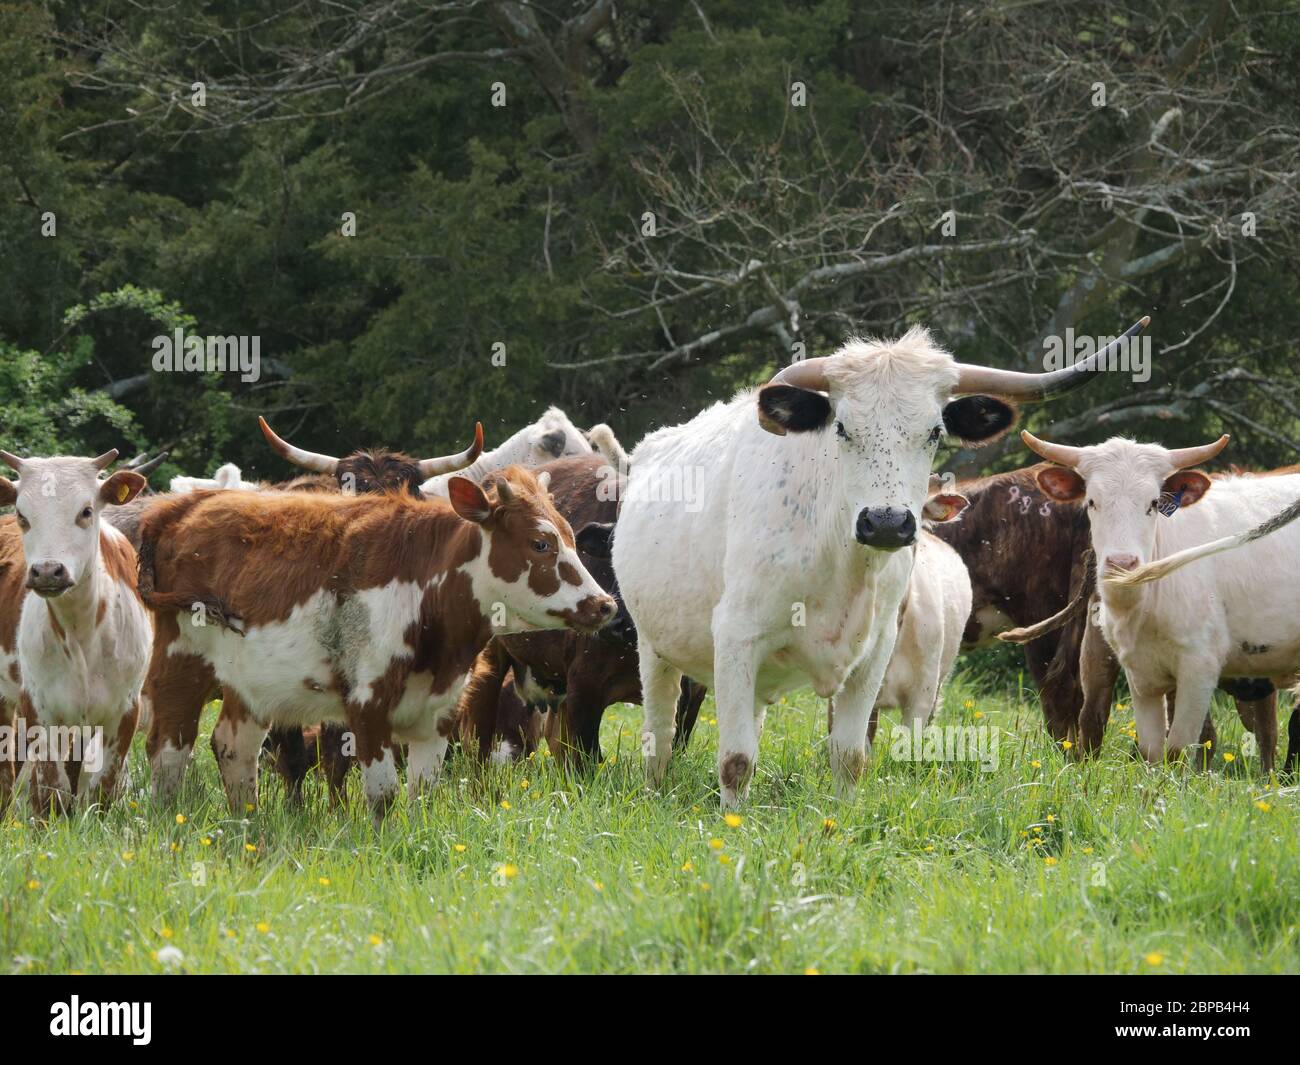 A herd of miniature riding bulls and cattle graze in a field April 29, 2020 in Johnsville, Maryland. Stock Photo